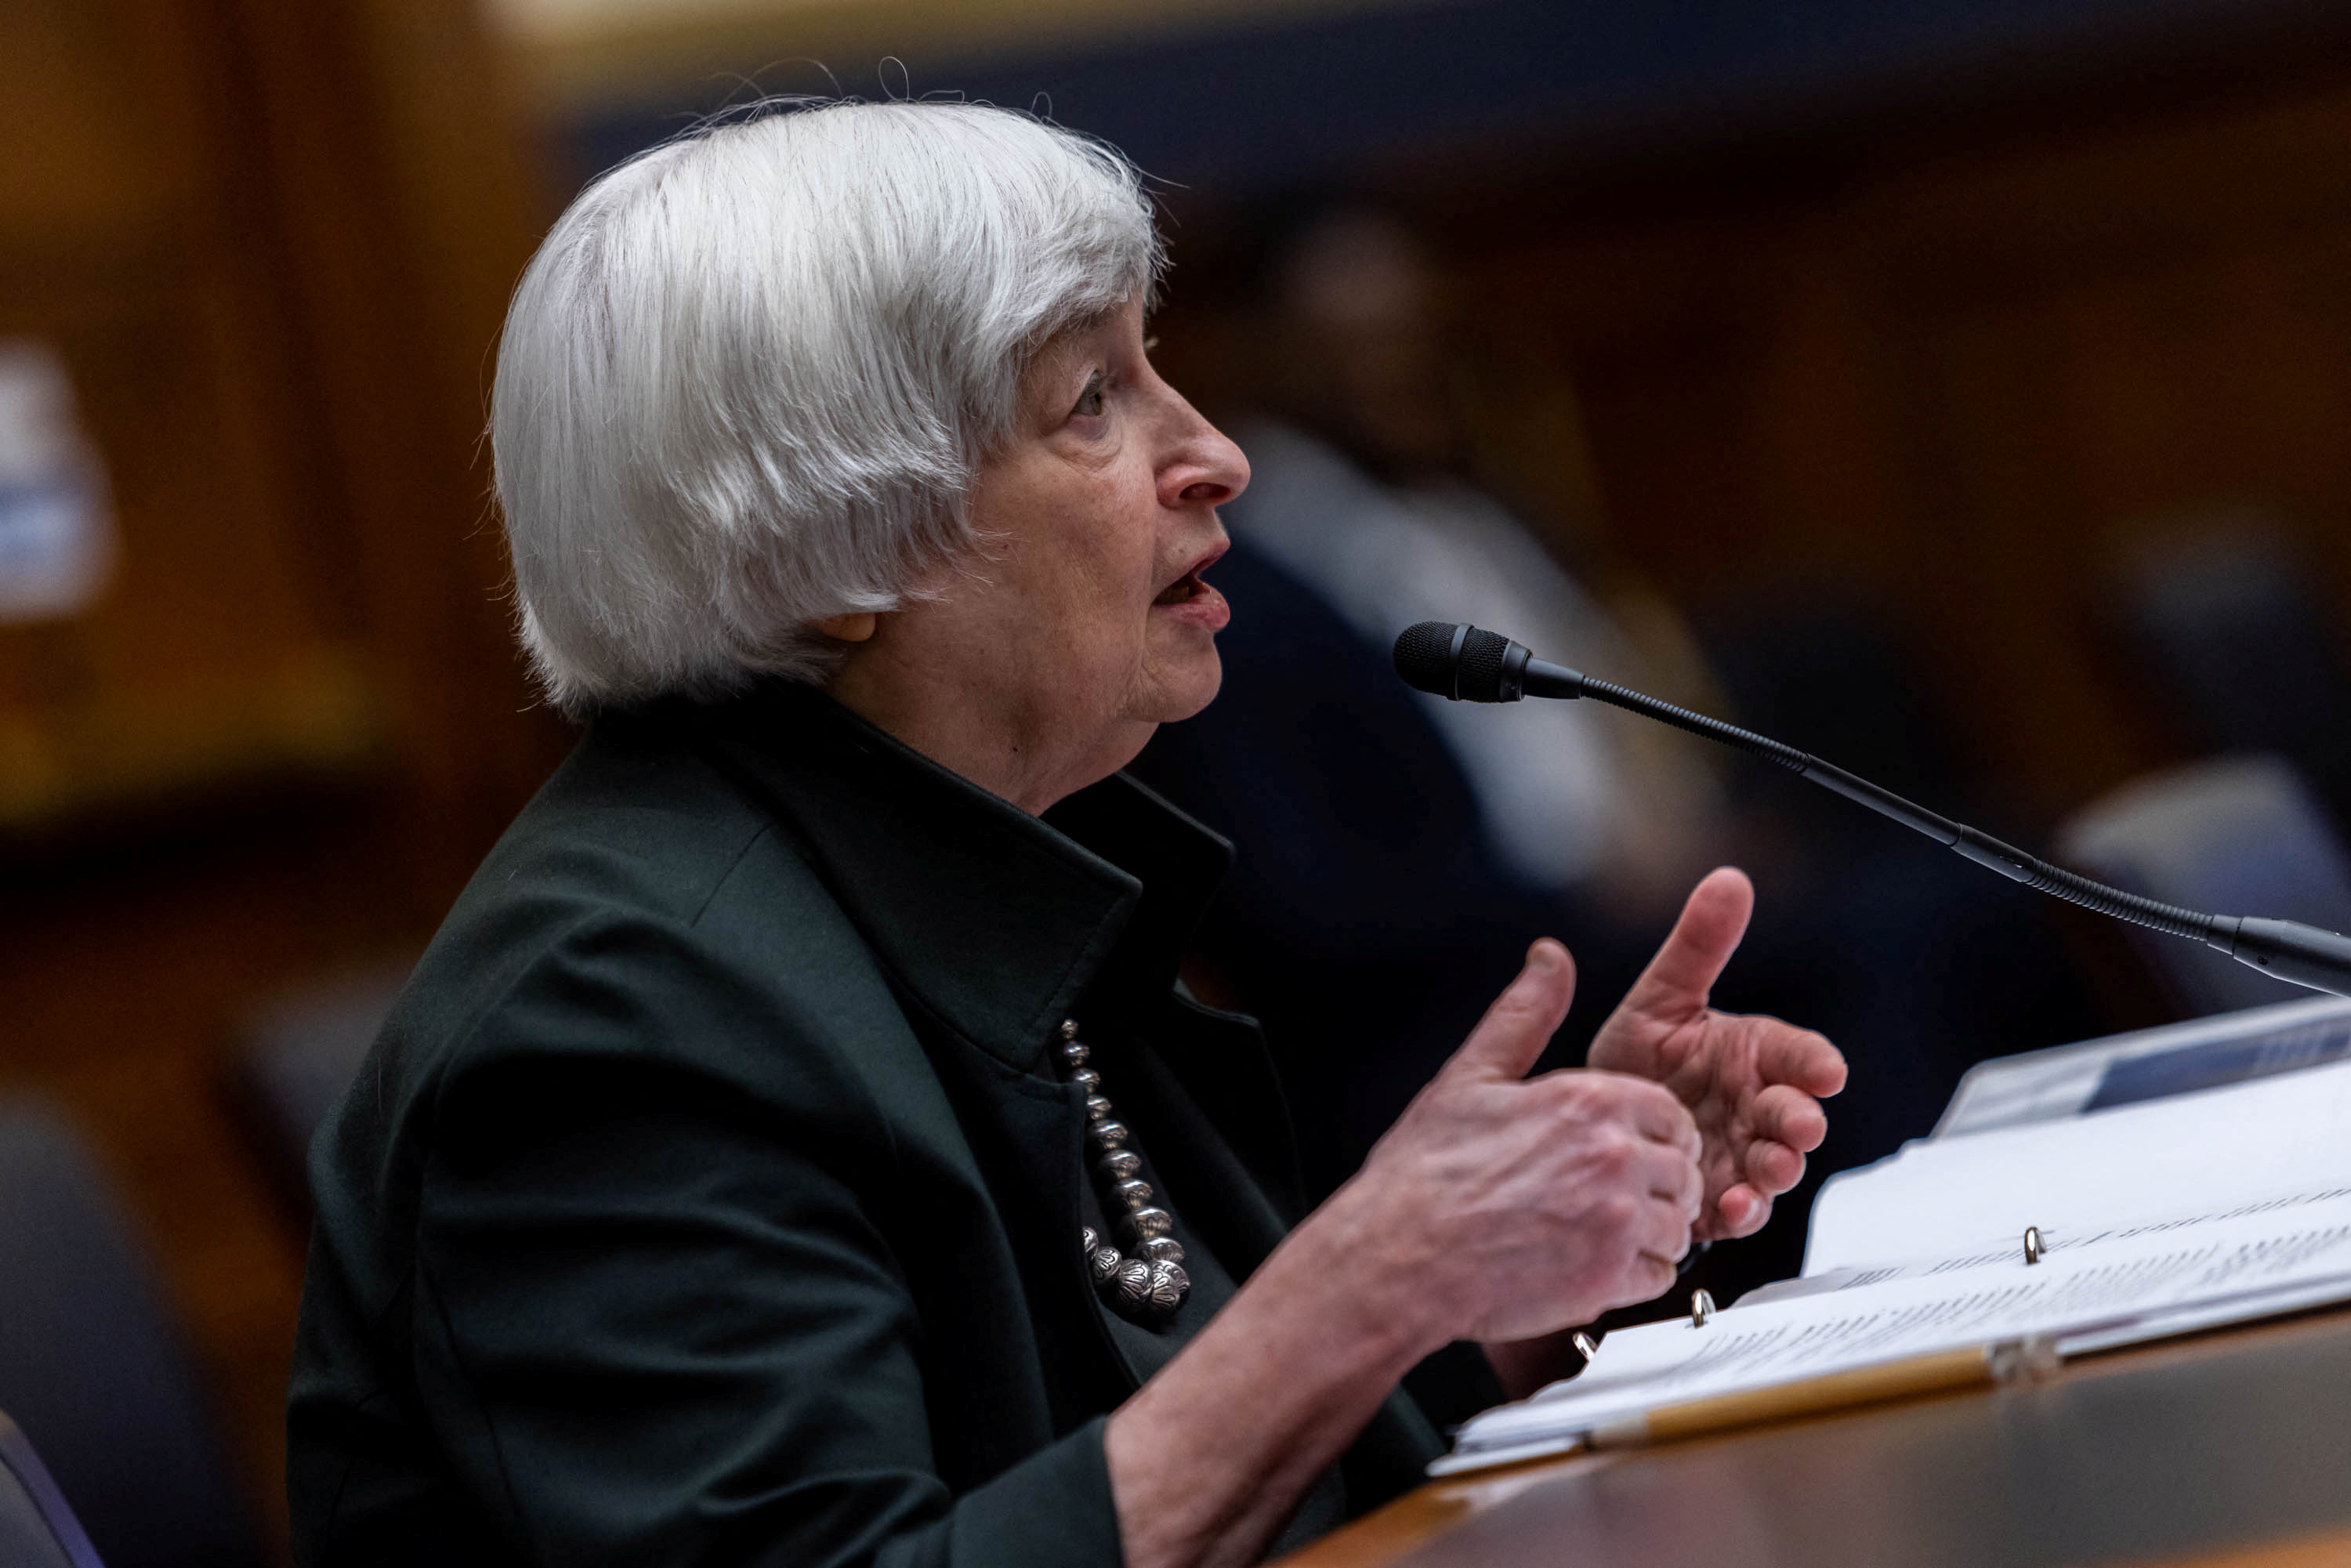 U.S. Treasury Secretary Janet Yellen testifies during a U.S. House Committee on Financial Services hearing on the Annual Report of the Financial Stability Oversight Council, on Capitol Hill in Washington, DC, U.S. May 12, 2022. Graeme Jennings/Pool via REUTERS